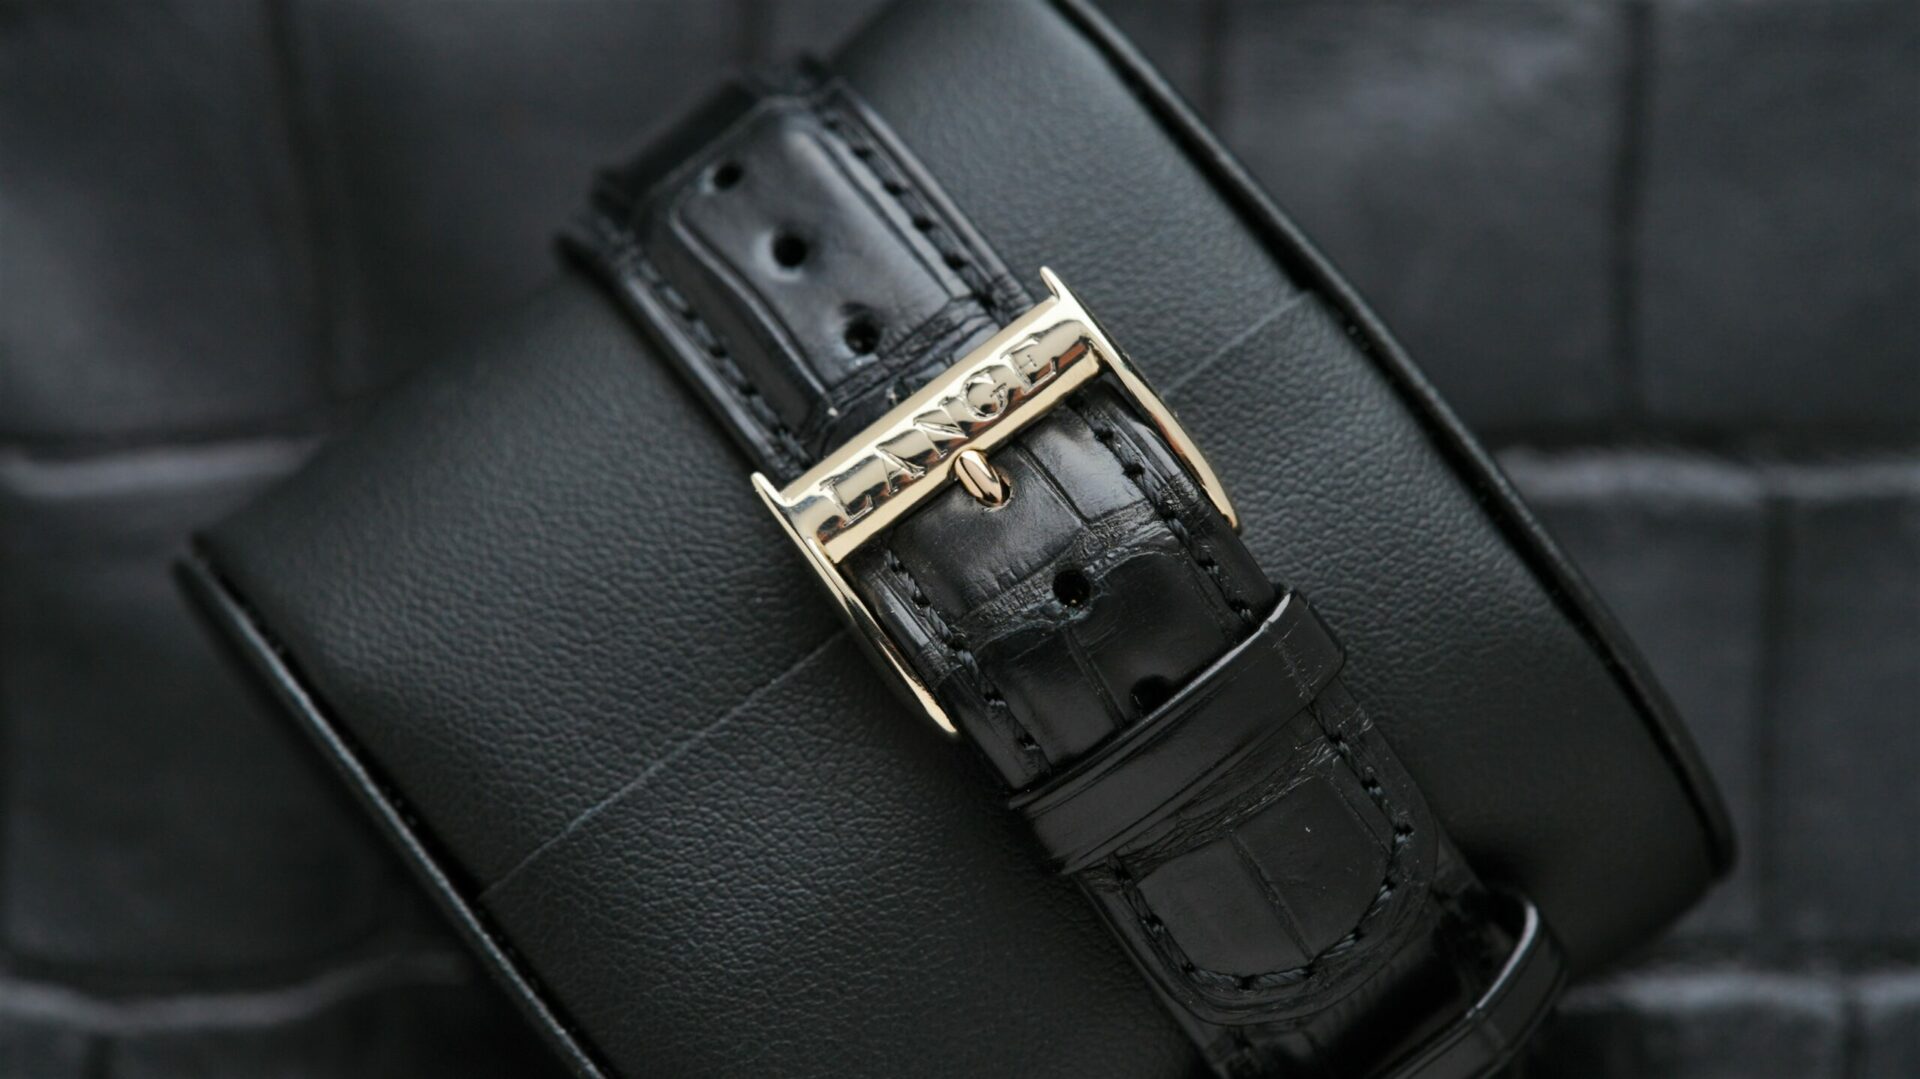 Strap and buckle on the A. Lange & Söhne Richard Lange Platinum watch.